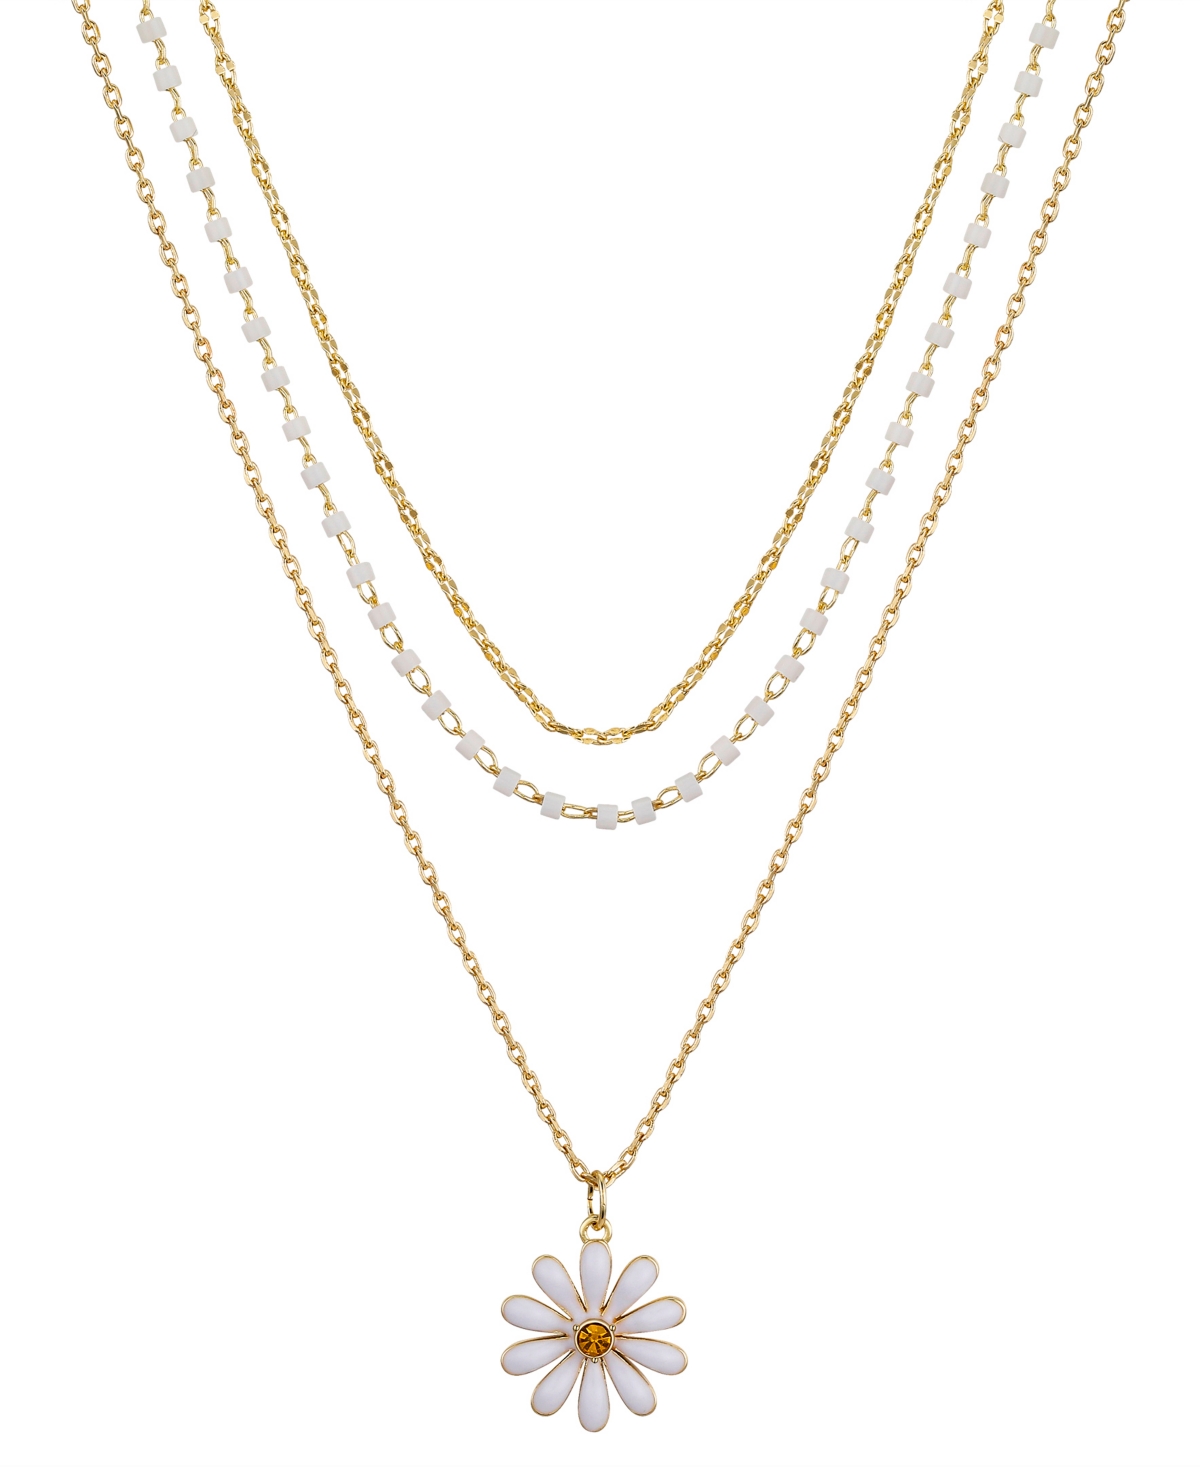 White Beaded and Enamel Flower Layered 3-Piece Necklace Set - Yellow